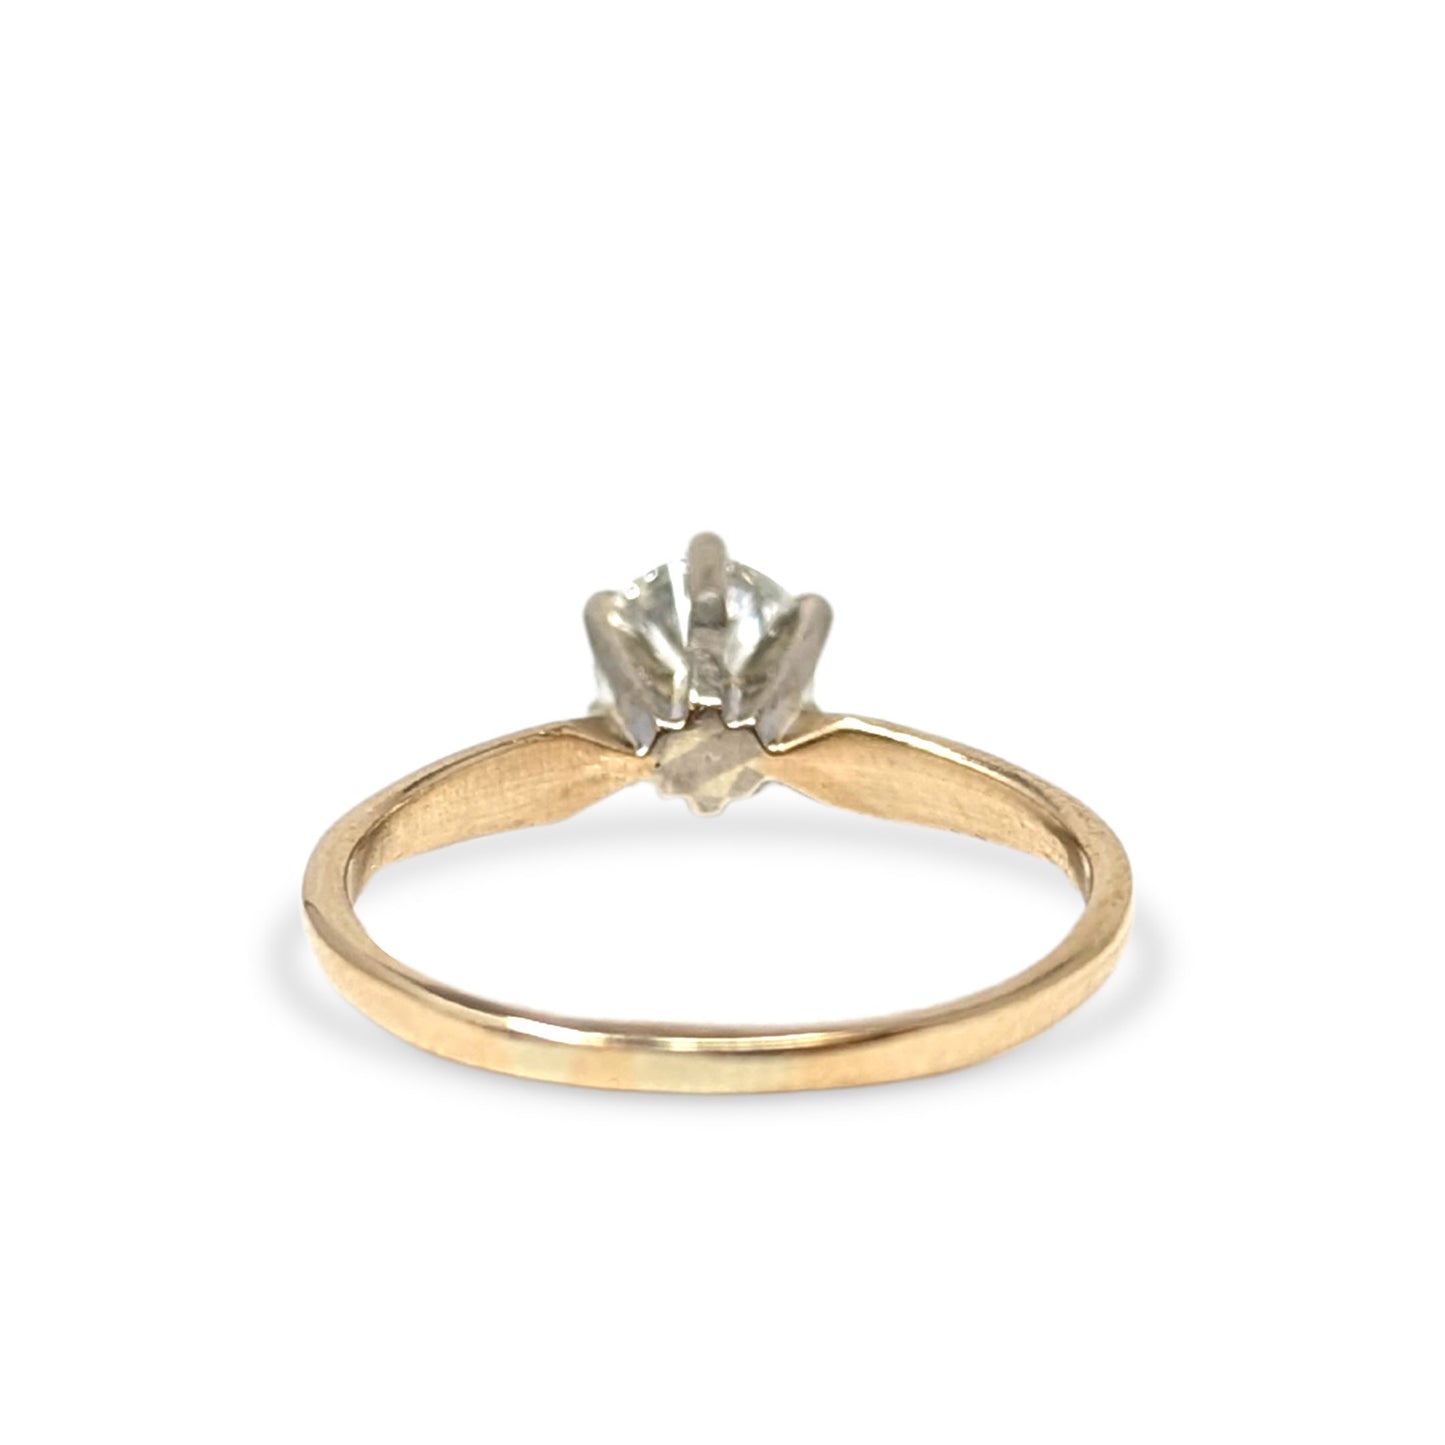 14K Gold 0.58ct Diamond Solitaire Ring - Size 4.25